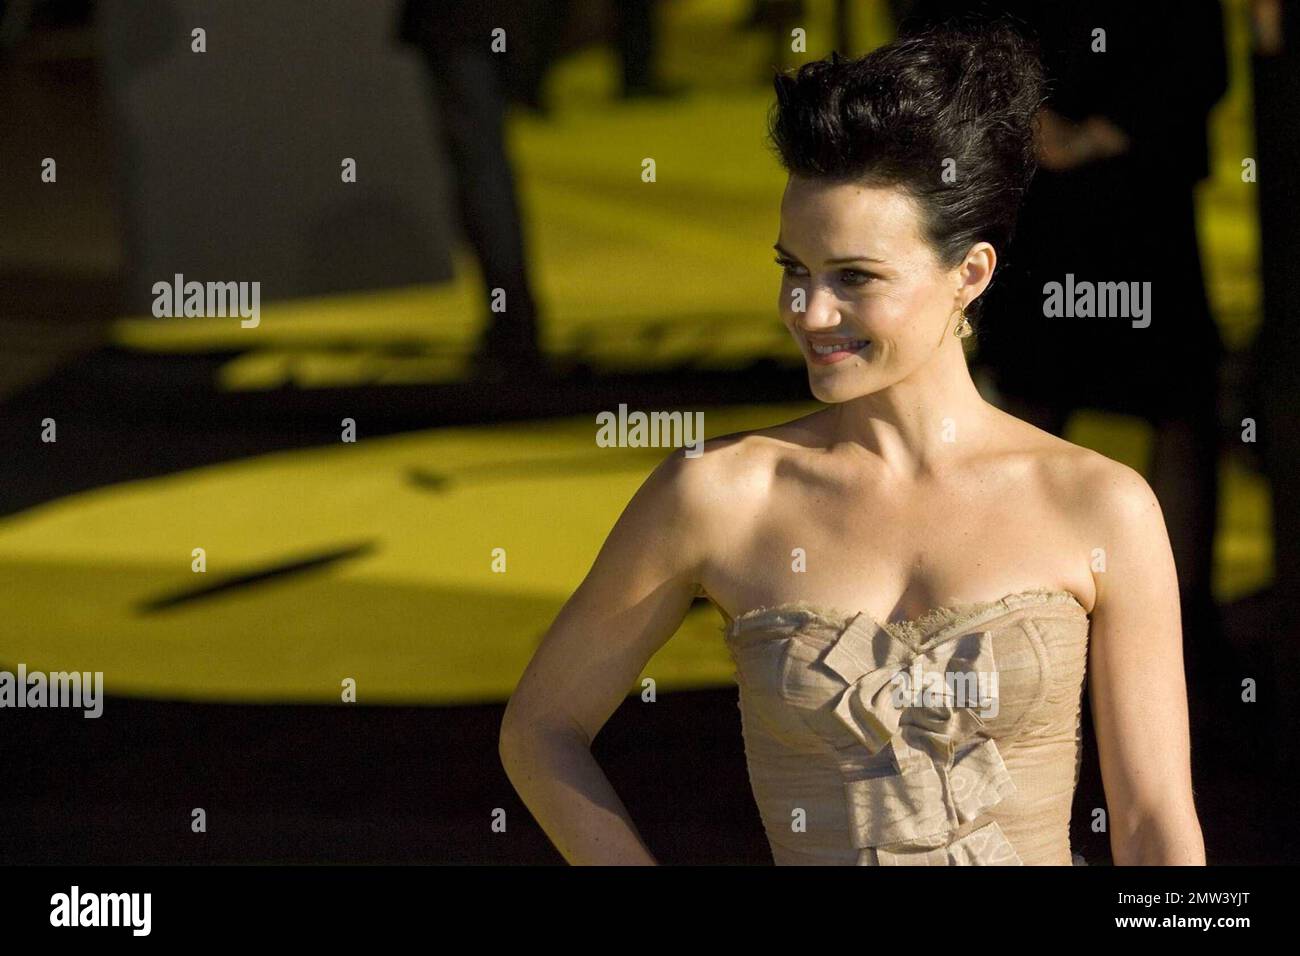 Carla Gugino attends the World Premiere of the 'Watchmen' movie at the Odeon Cinema, Leicester Square, London, UK 02/23/2009. Stock Photo